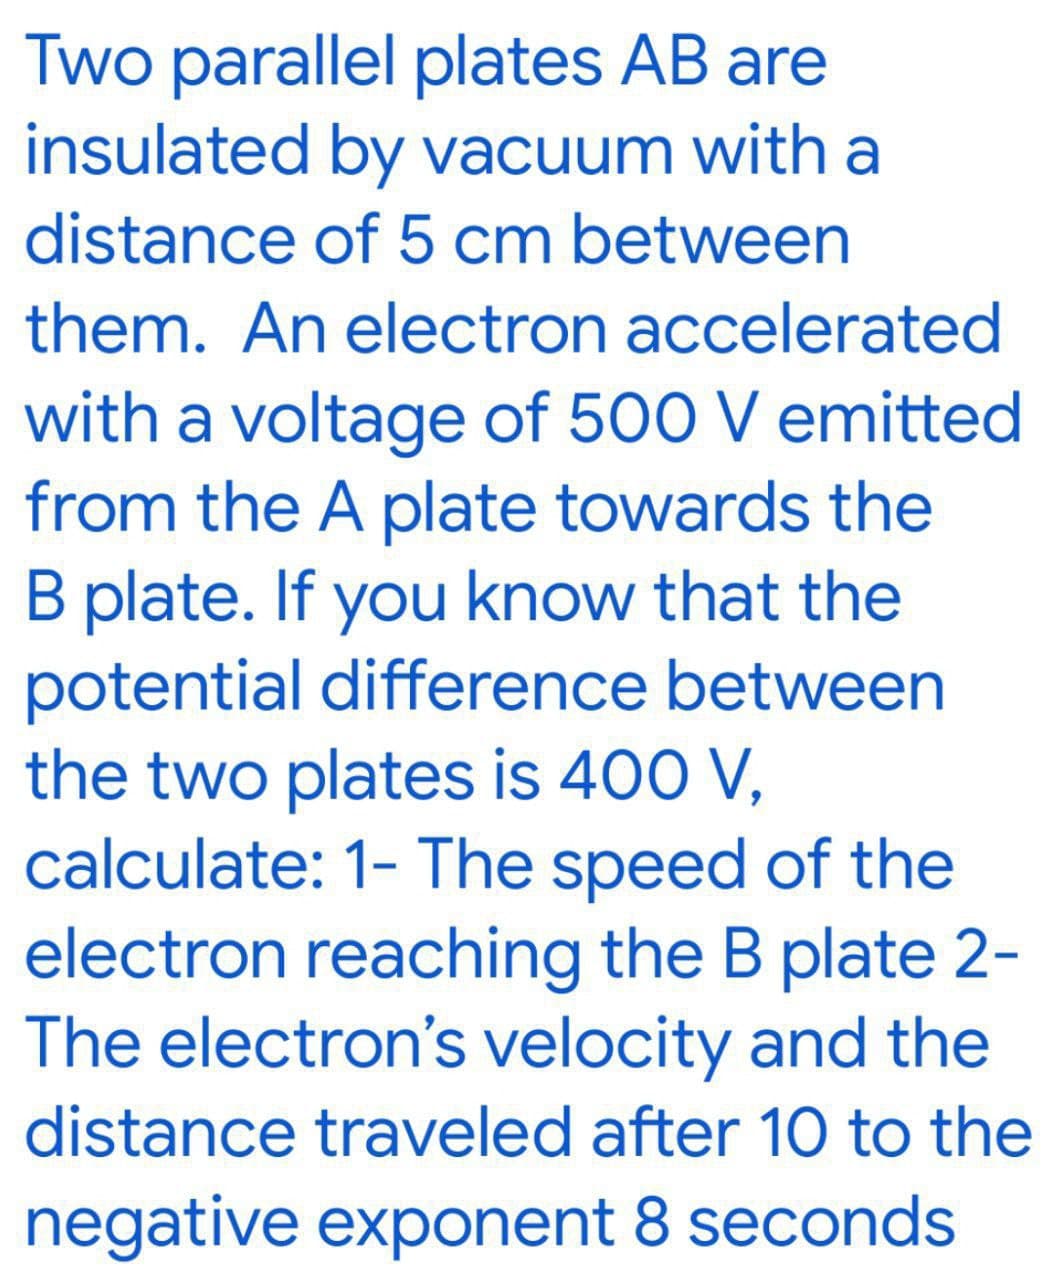 Two parallel plates AB are
insulated by vacuum with a
distance of 5 cm between
them. An electron accelerated
with a voltage of 500 V emitted
from the A plate towards the
B plate. If you know that the
potential difference between
the two plates is 400 V,
calculate: 1- The speed of the
electron reaching the B plate 2-
The electron's velocity and the
distance traveled after 10 to the
negative exponent 8 seconds
